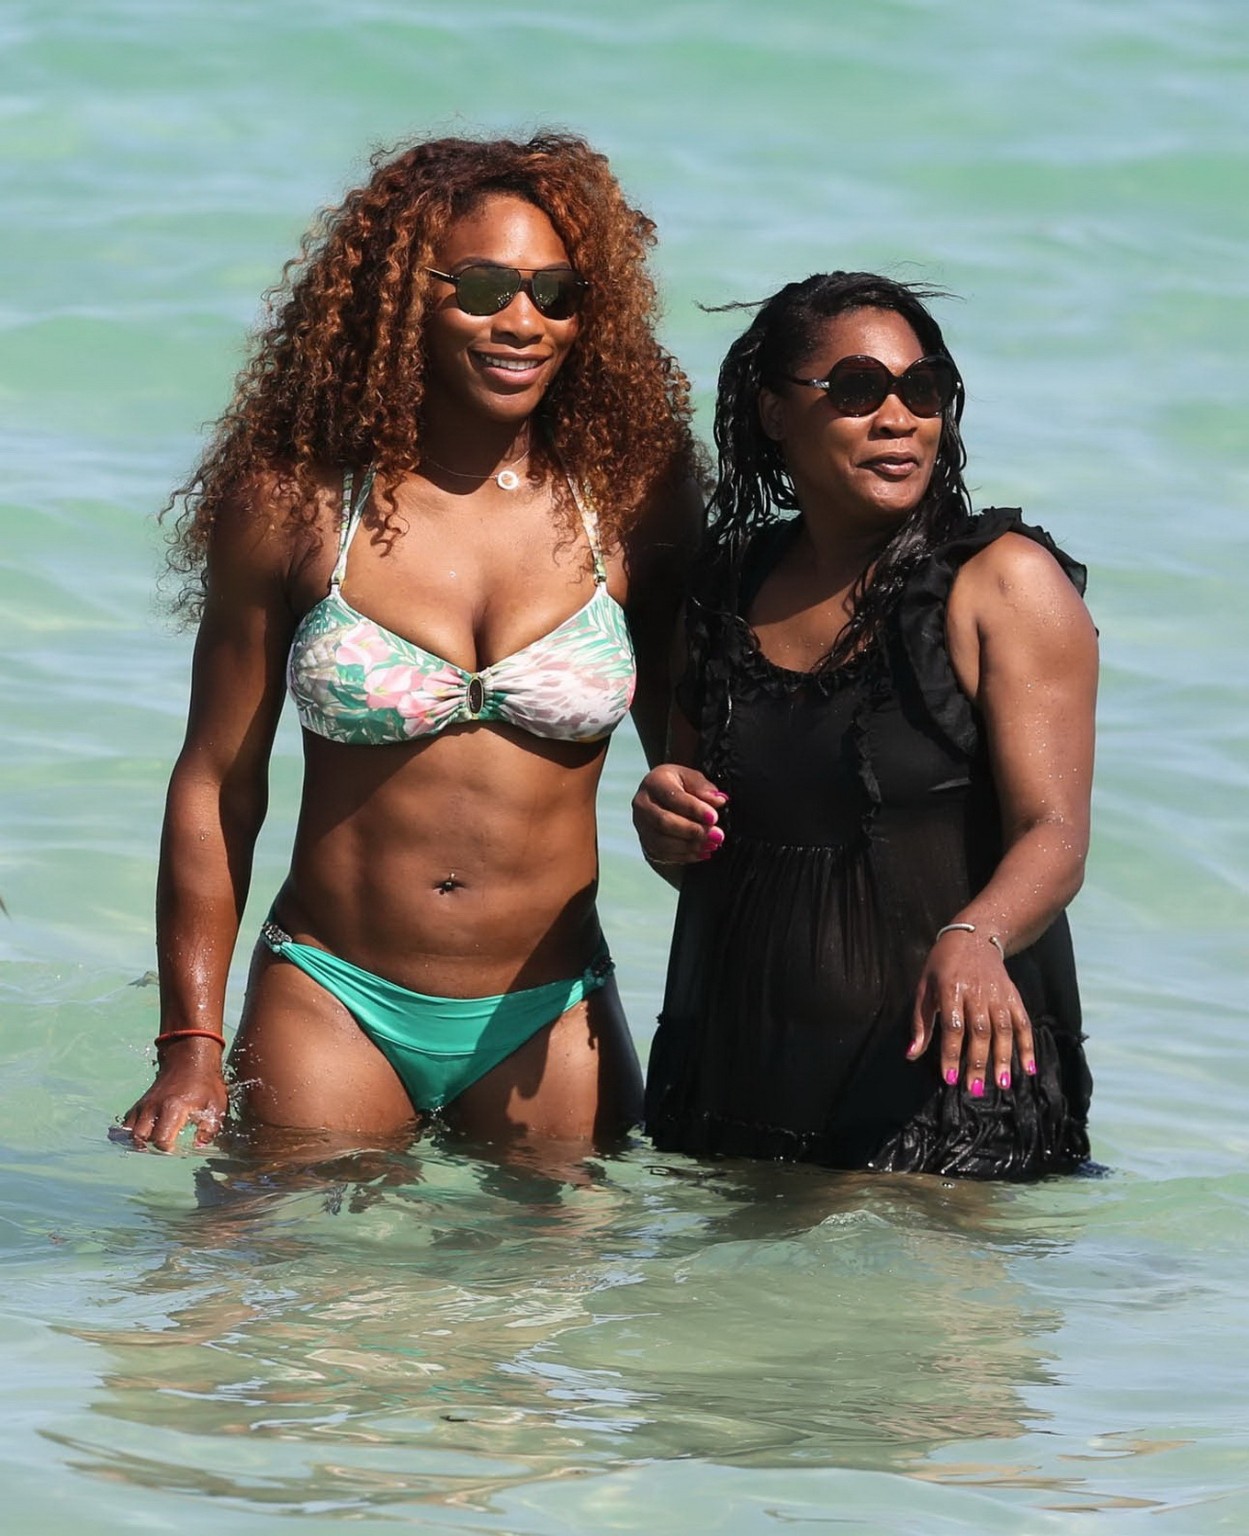 Serena Williams showing off her bikini curves at the beach in Miami